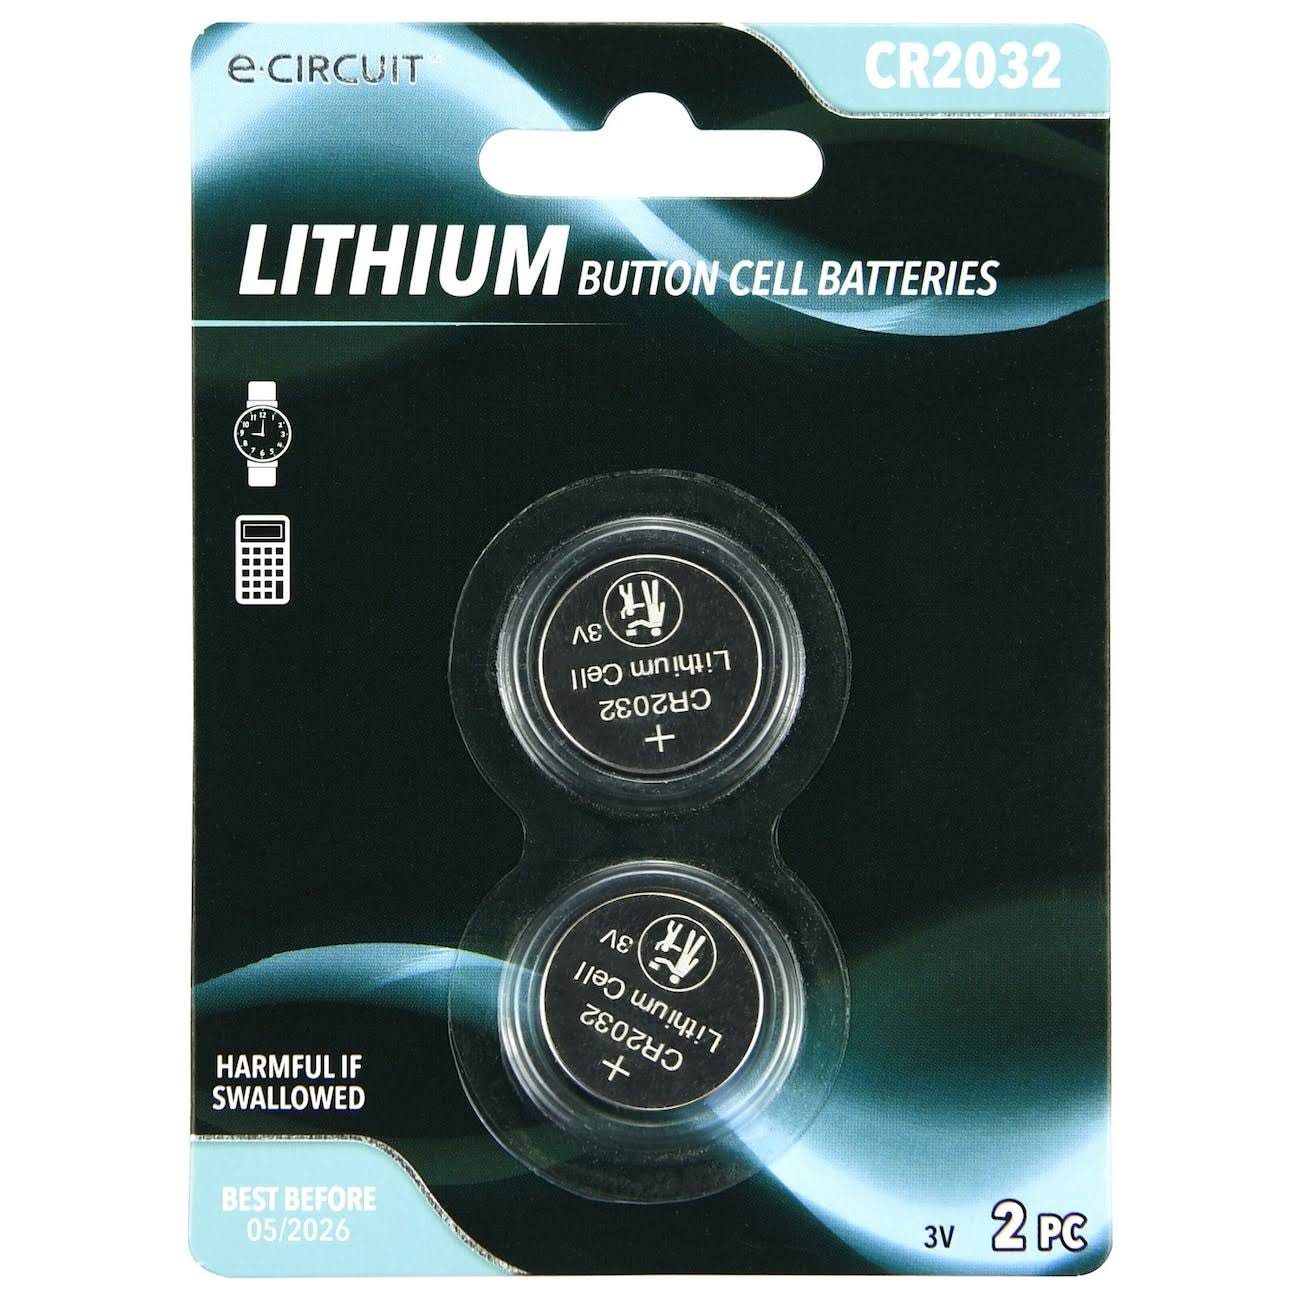 E-Circuit Lithium Button Cell Batteries - Pack of 2 | Image